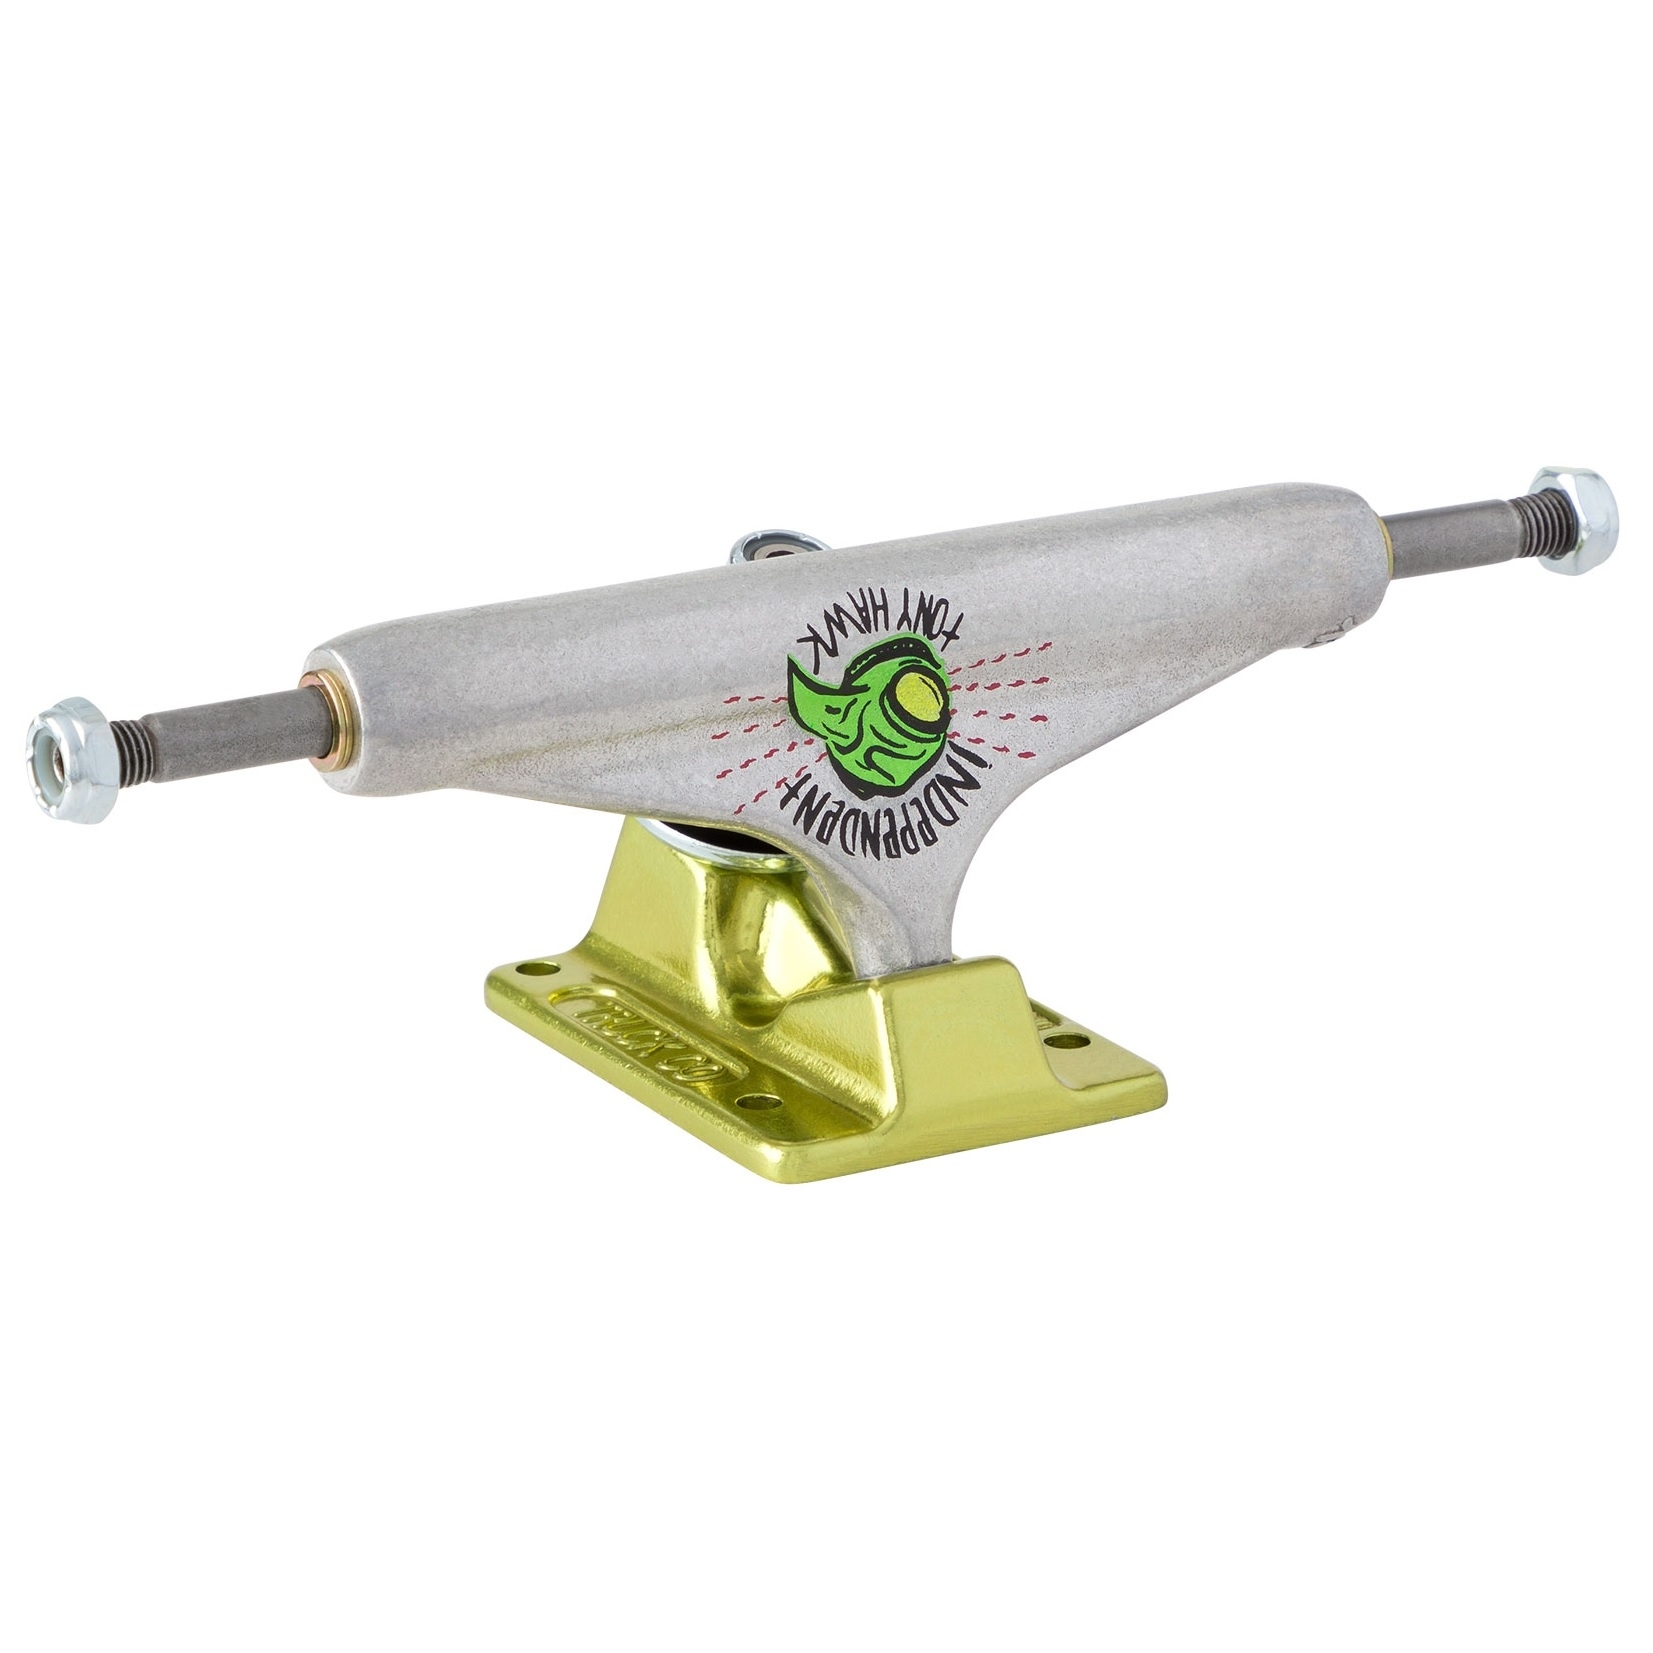 Stage 11 Hawk Transmission Forged Hollow Truck (Silver/Green)